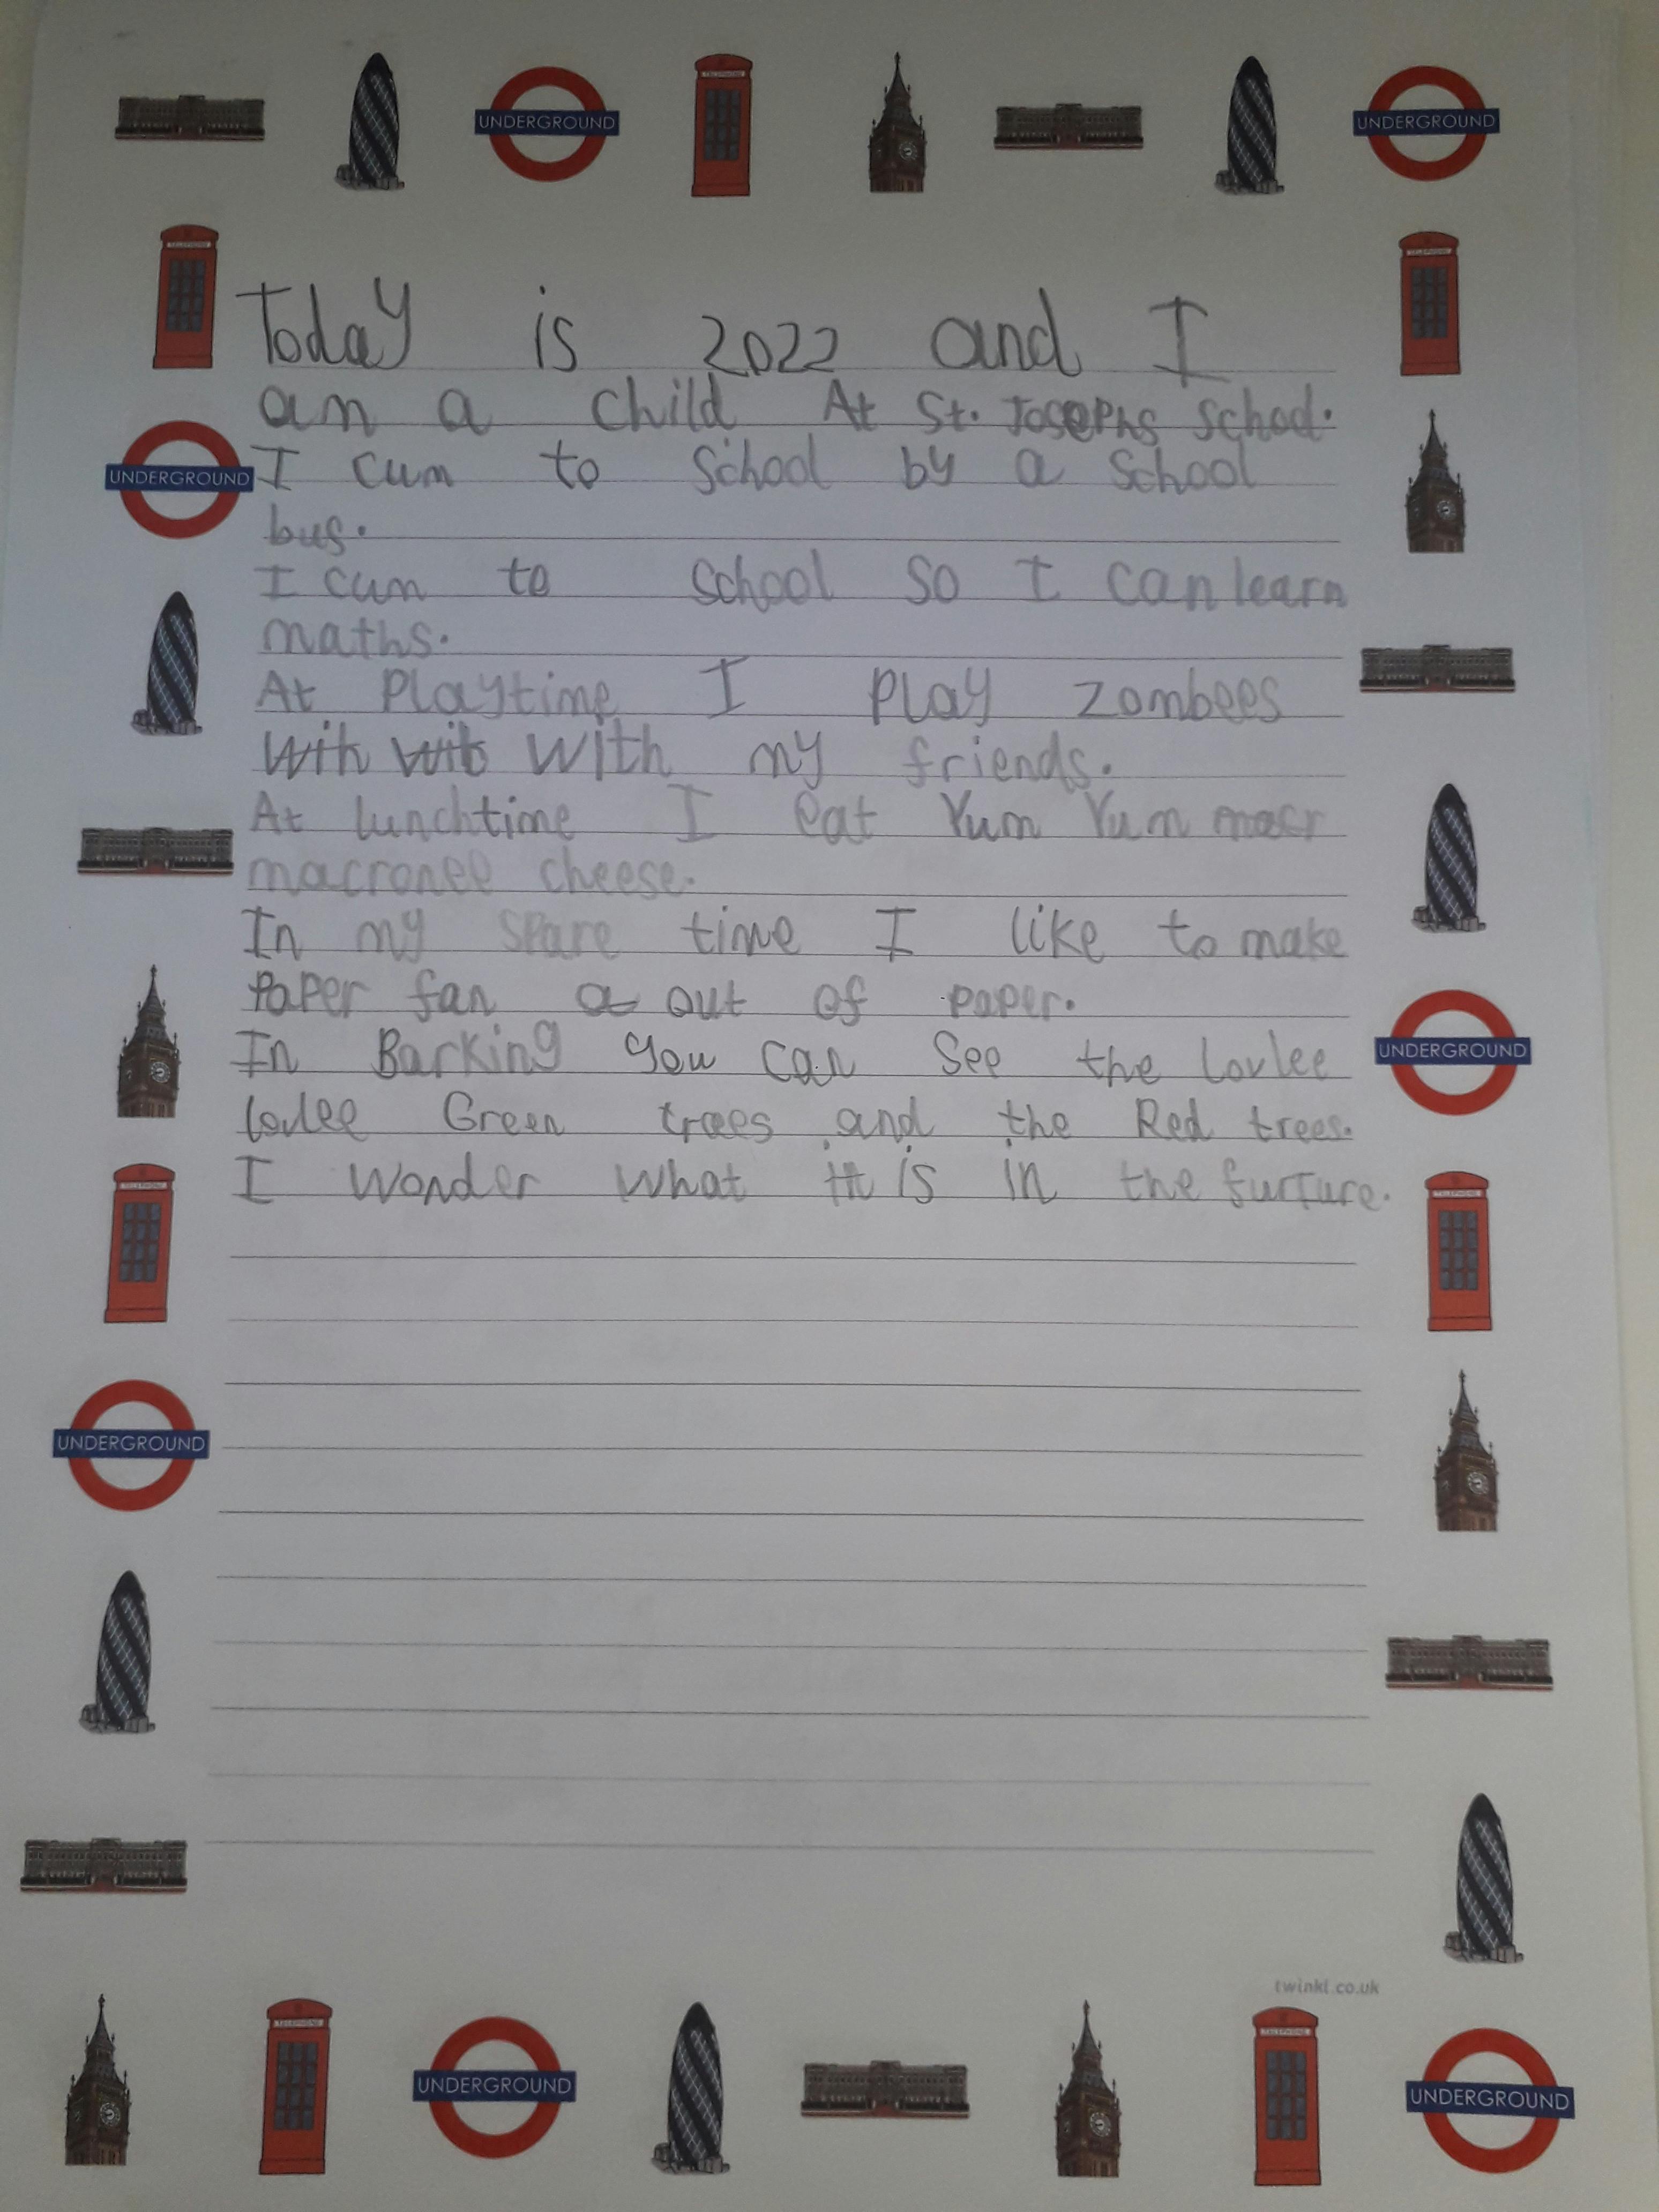 Barking Today, by Chyanne, St Joseph's Primary School